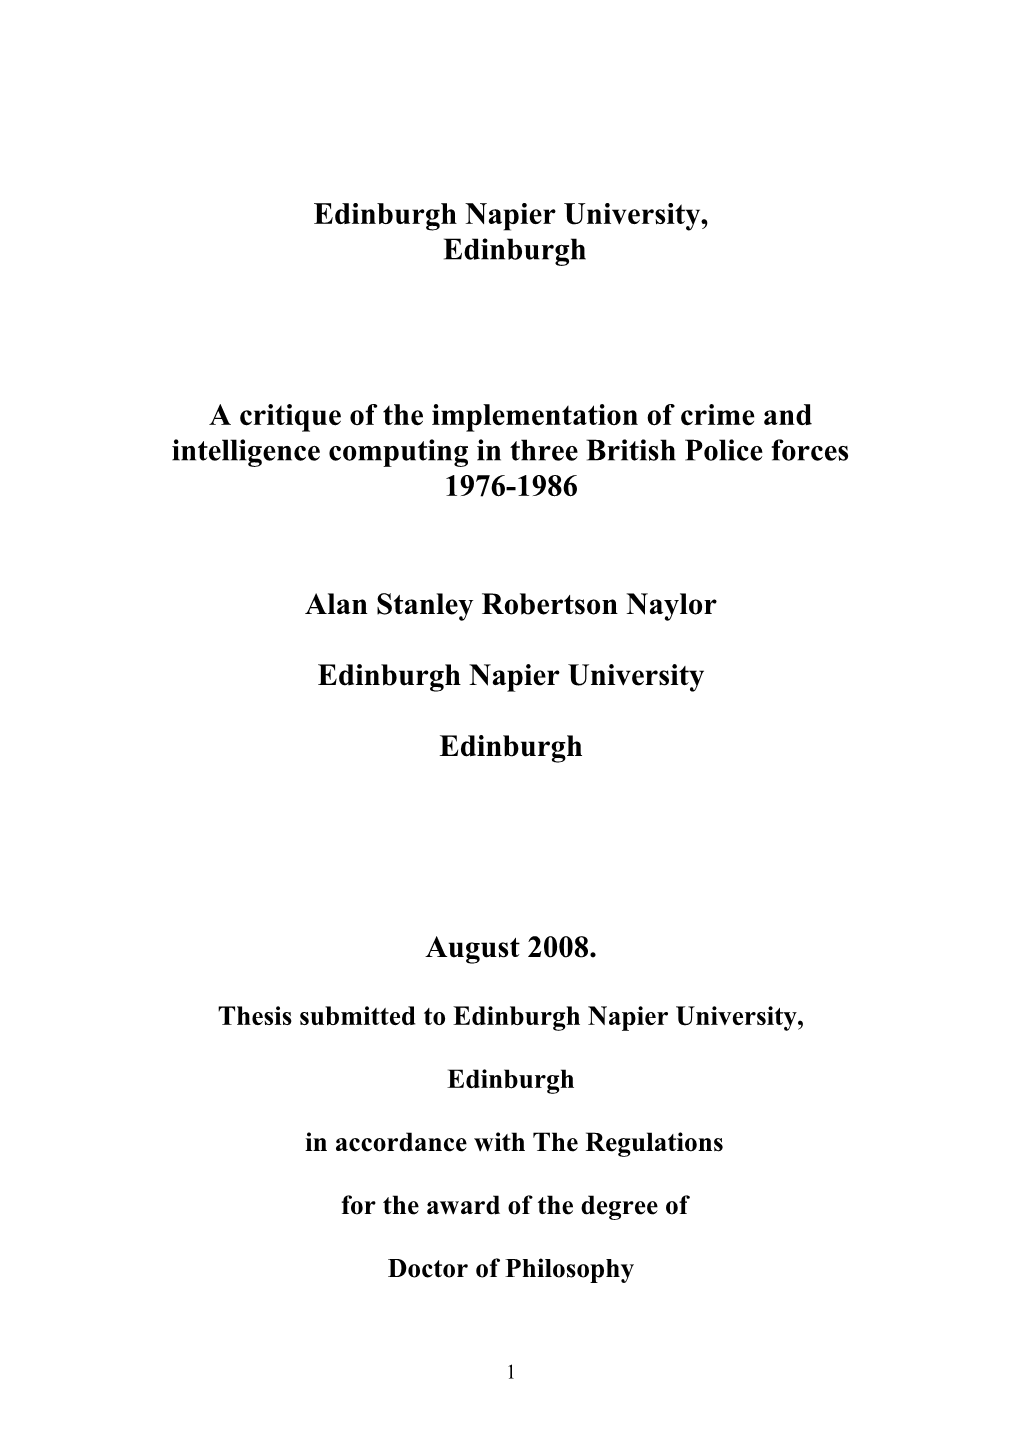 Submitted To Napier University In Accordance With The Regulations For The Award Of